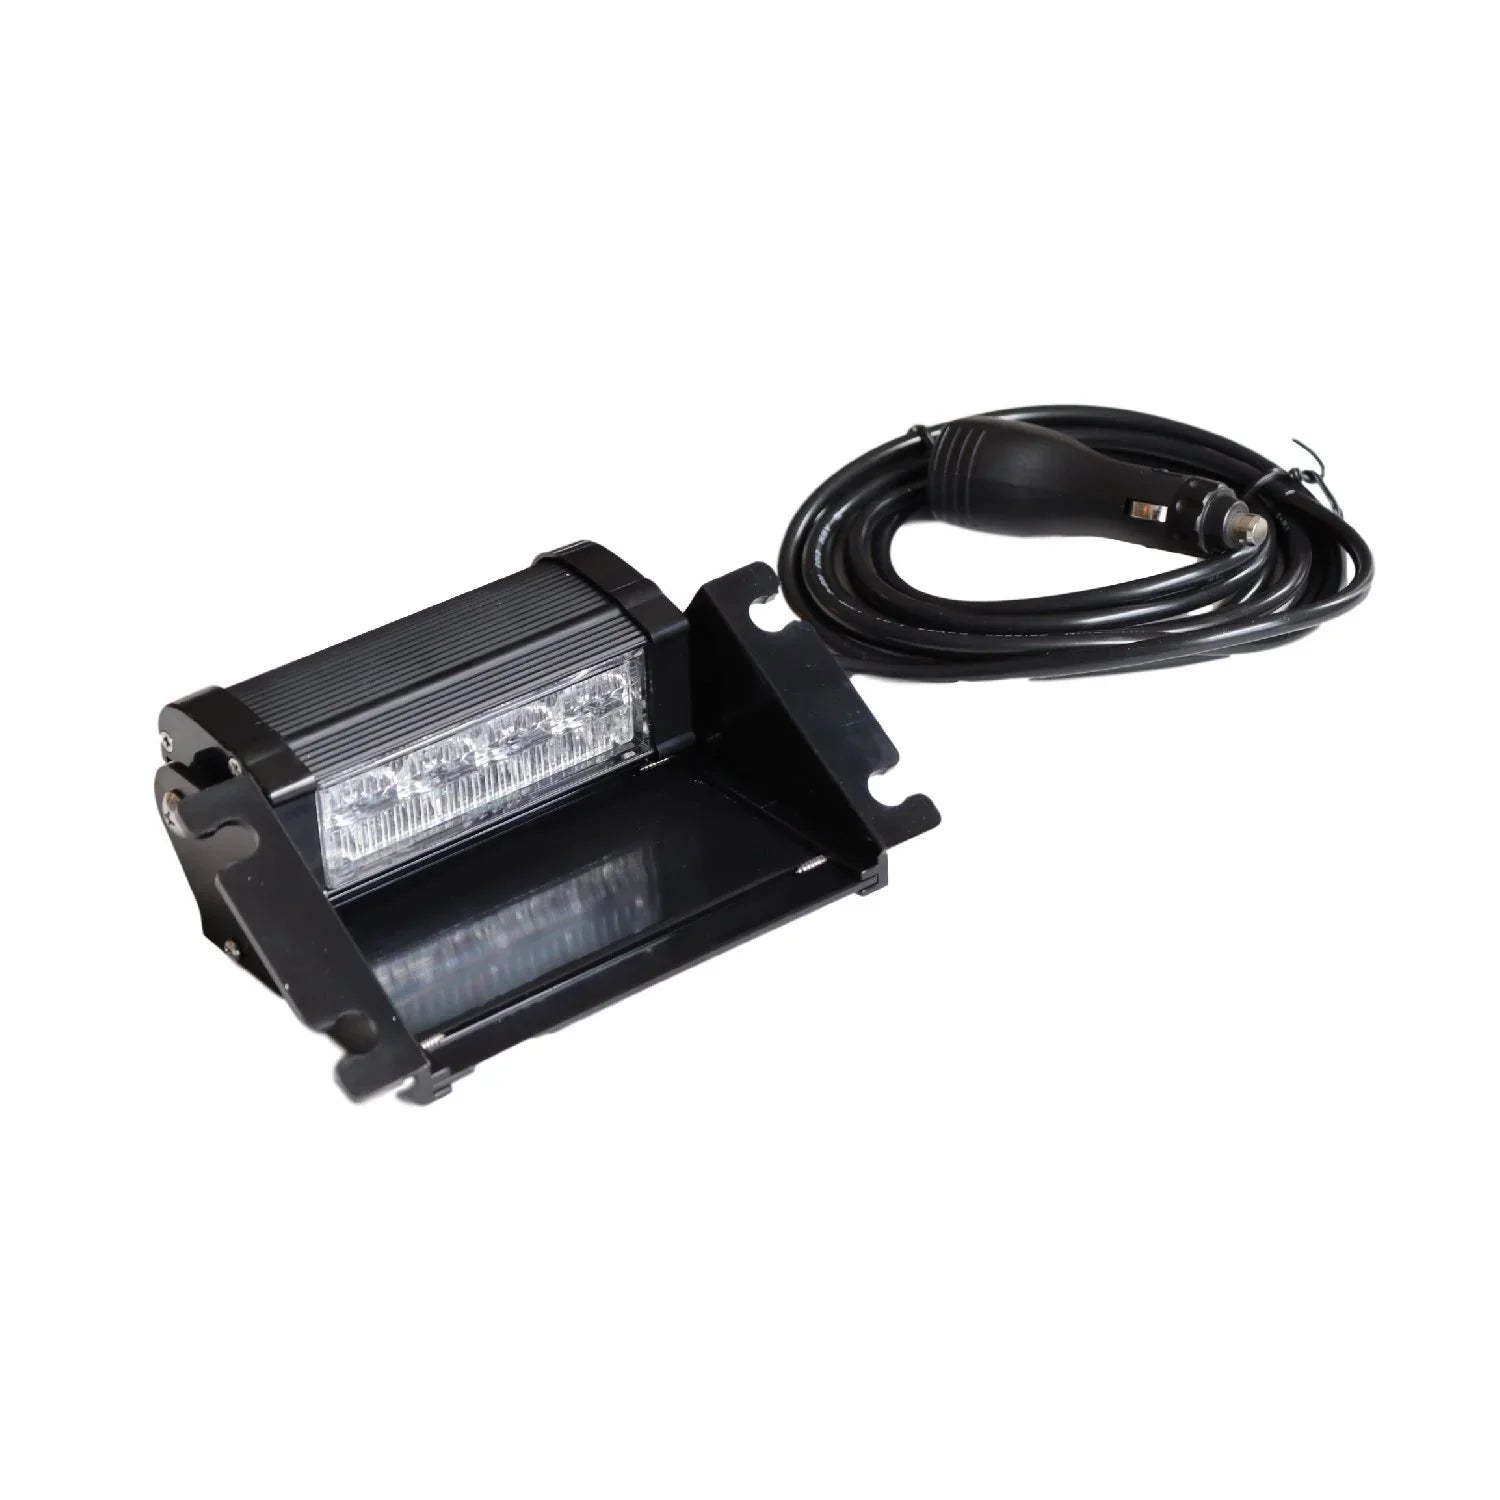 ECO 3611A ECCO Directional 4 LED Dash Light (Switched, Amber, Suction or 2 Bolt)